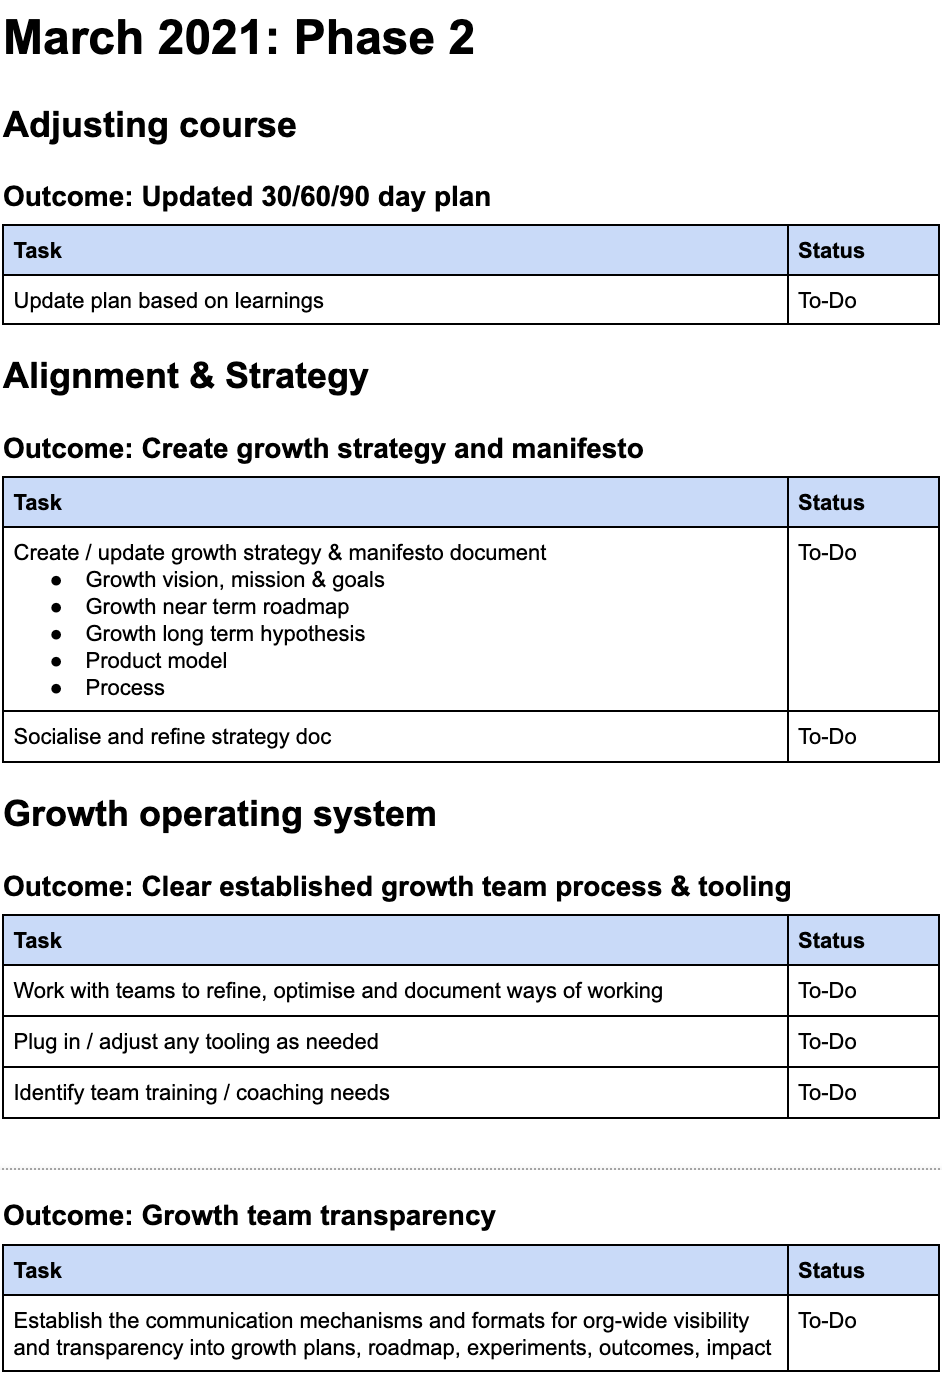 Onboarding plan page 6